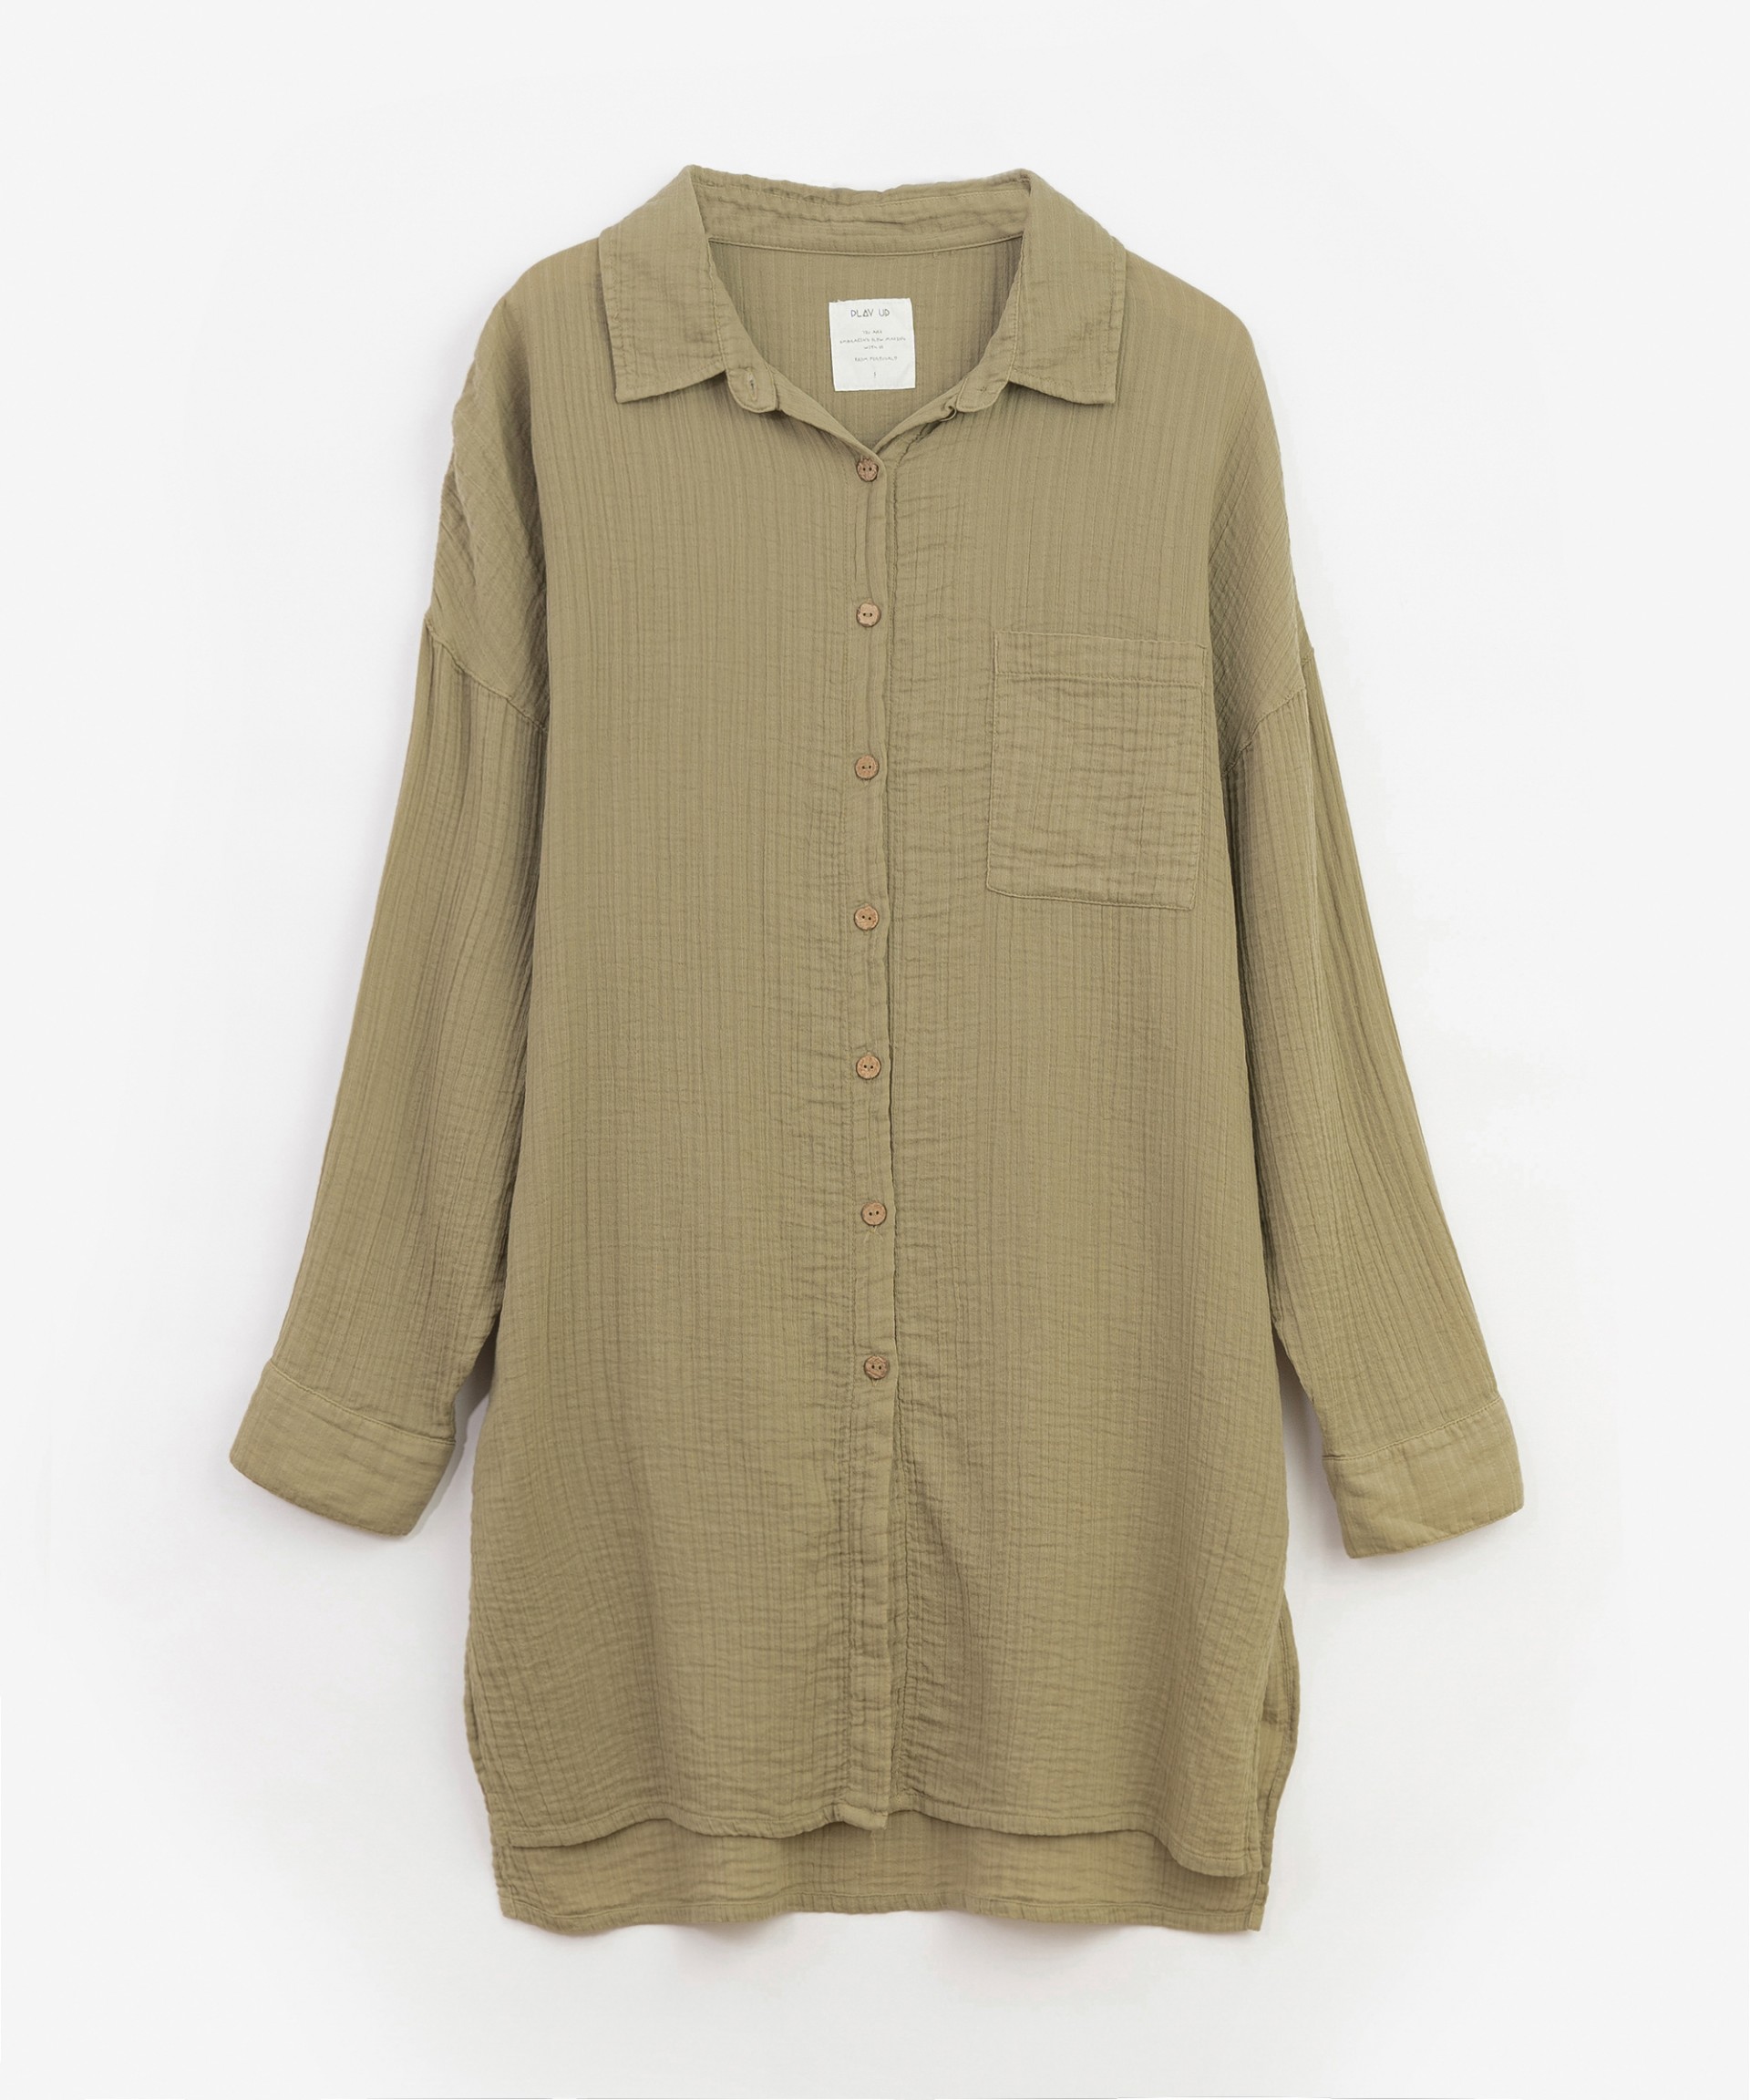 Woven shirt with breast pocket | Organic Care